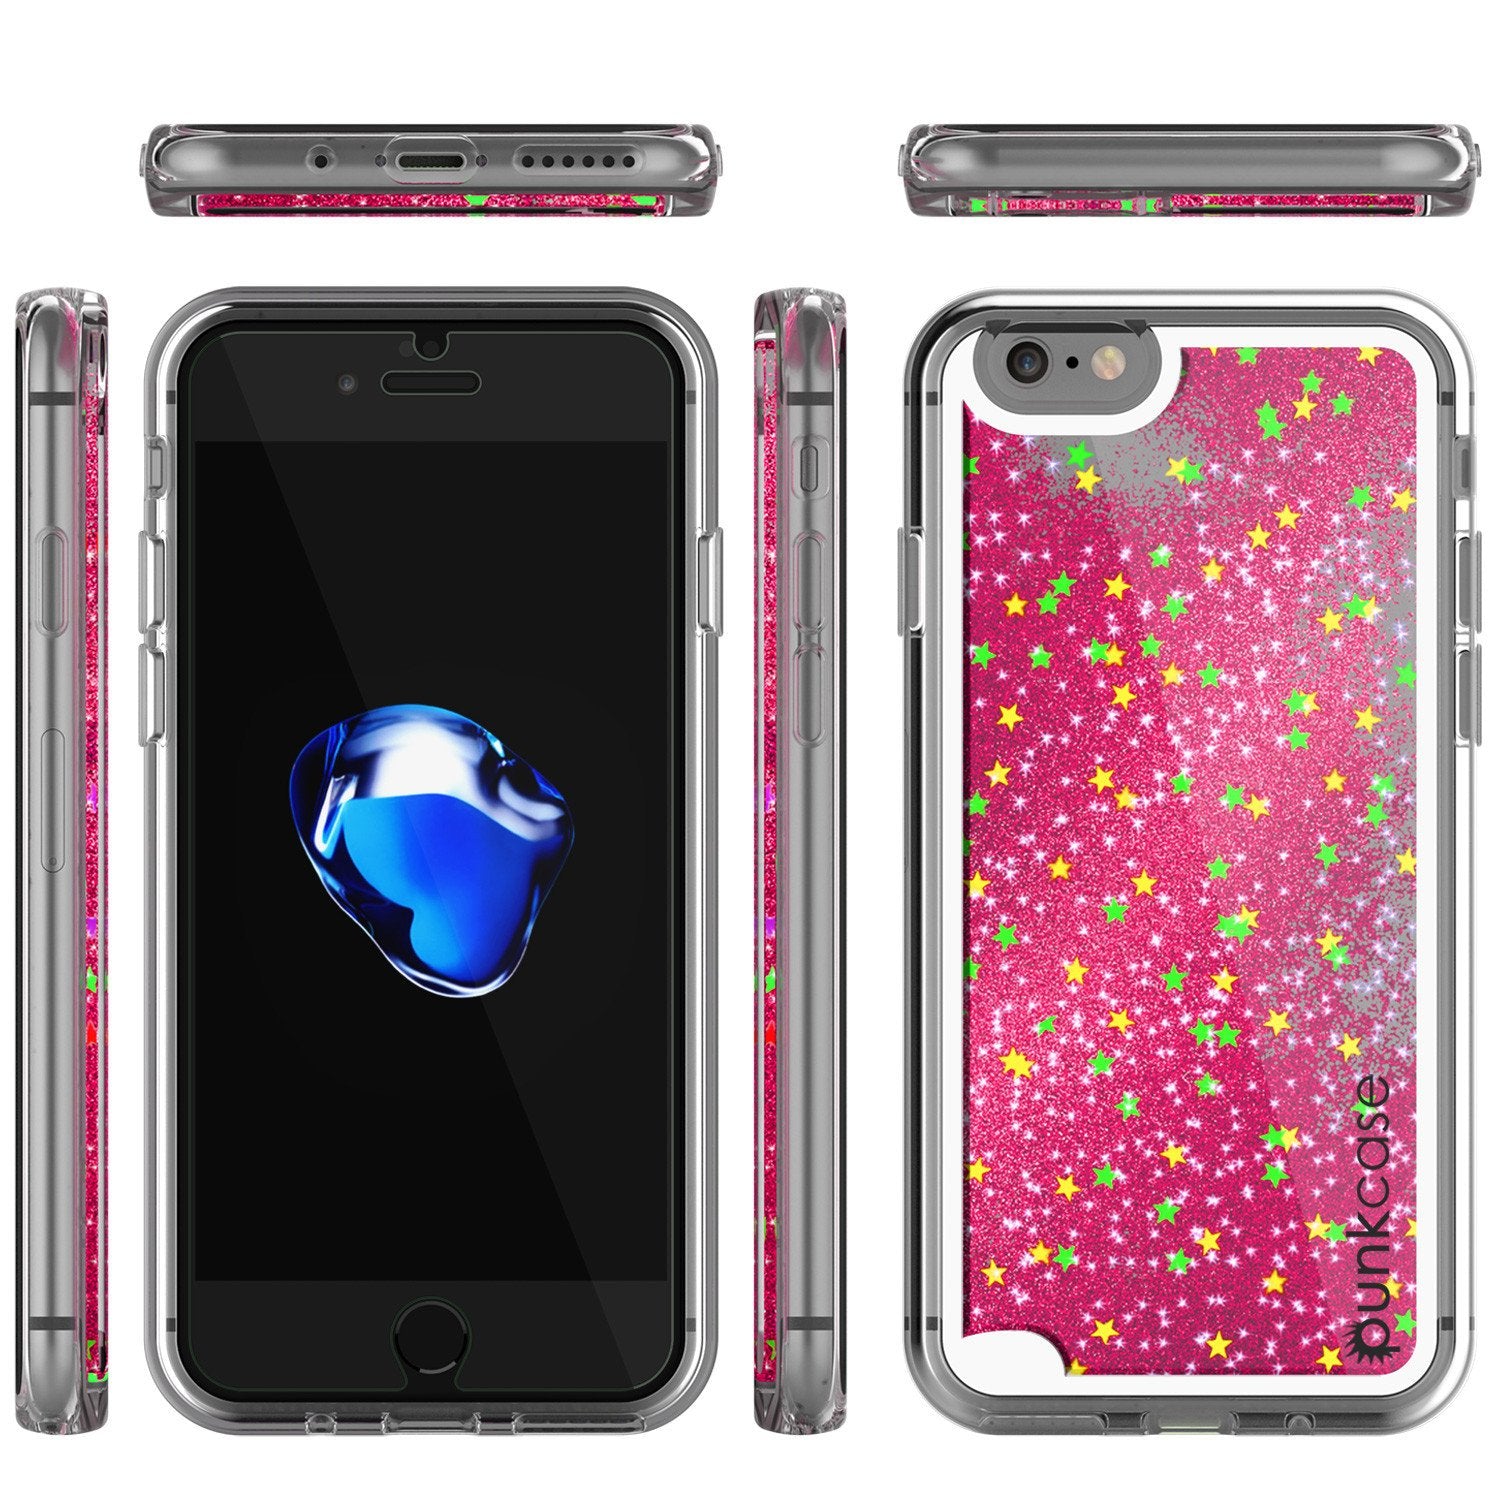 iPhone 7 Case, Punkcase [Liquid Pink Series] Protective Dual Layer Floating Glitter Cover with lots of Bling & Sparkle + 0.3mm Tempered Glass Screen Protector for Apple iPhone 7s